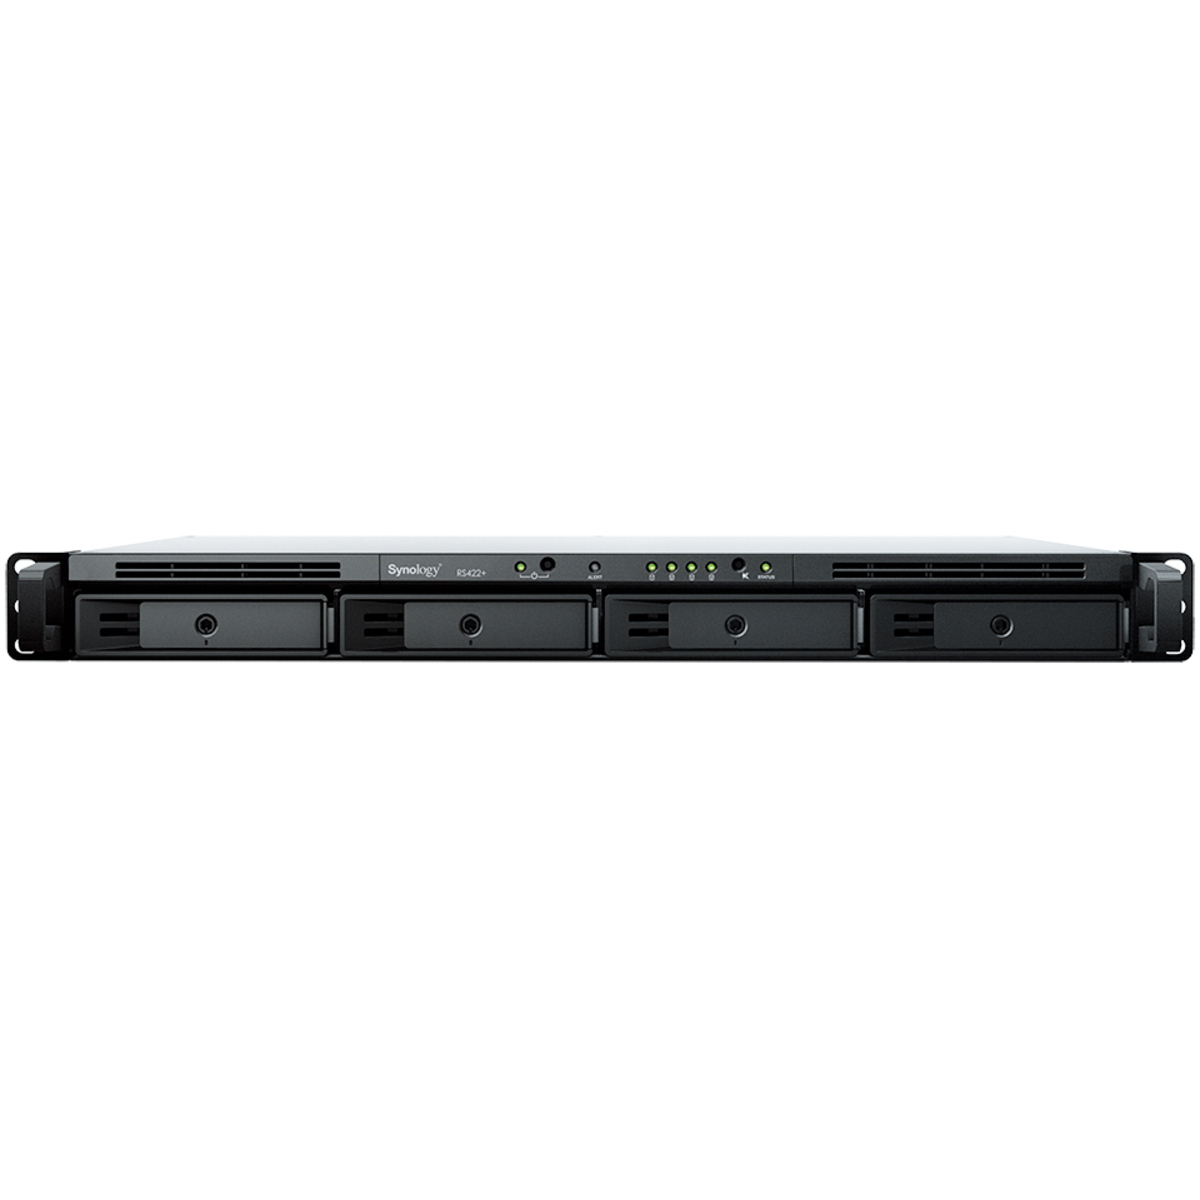 Synology RackStation RS422+ 40tb 4-Bay RackMount Personal / Basic Home / Small Office NAS - Network Attached Storage Device 4x10tb Seagate IronWolf Pro ST10000NT001 3.5 7200rpm SATA 6Gb/s HDD NAS Class Drives Installed - Burn-In Tested - ON SALE RackStation RS422+